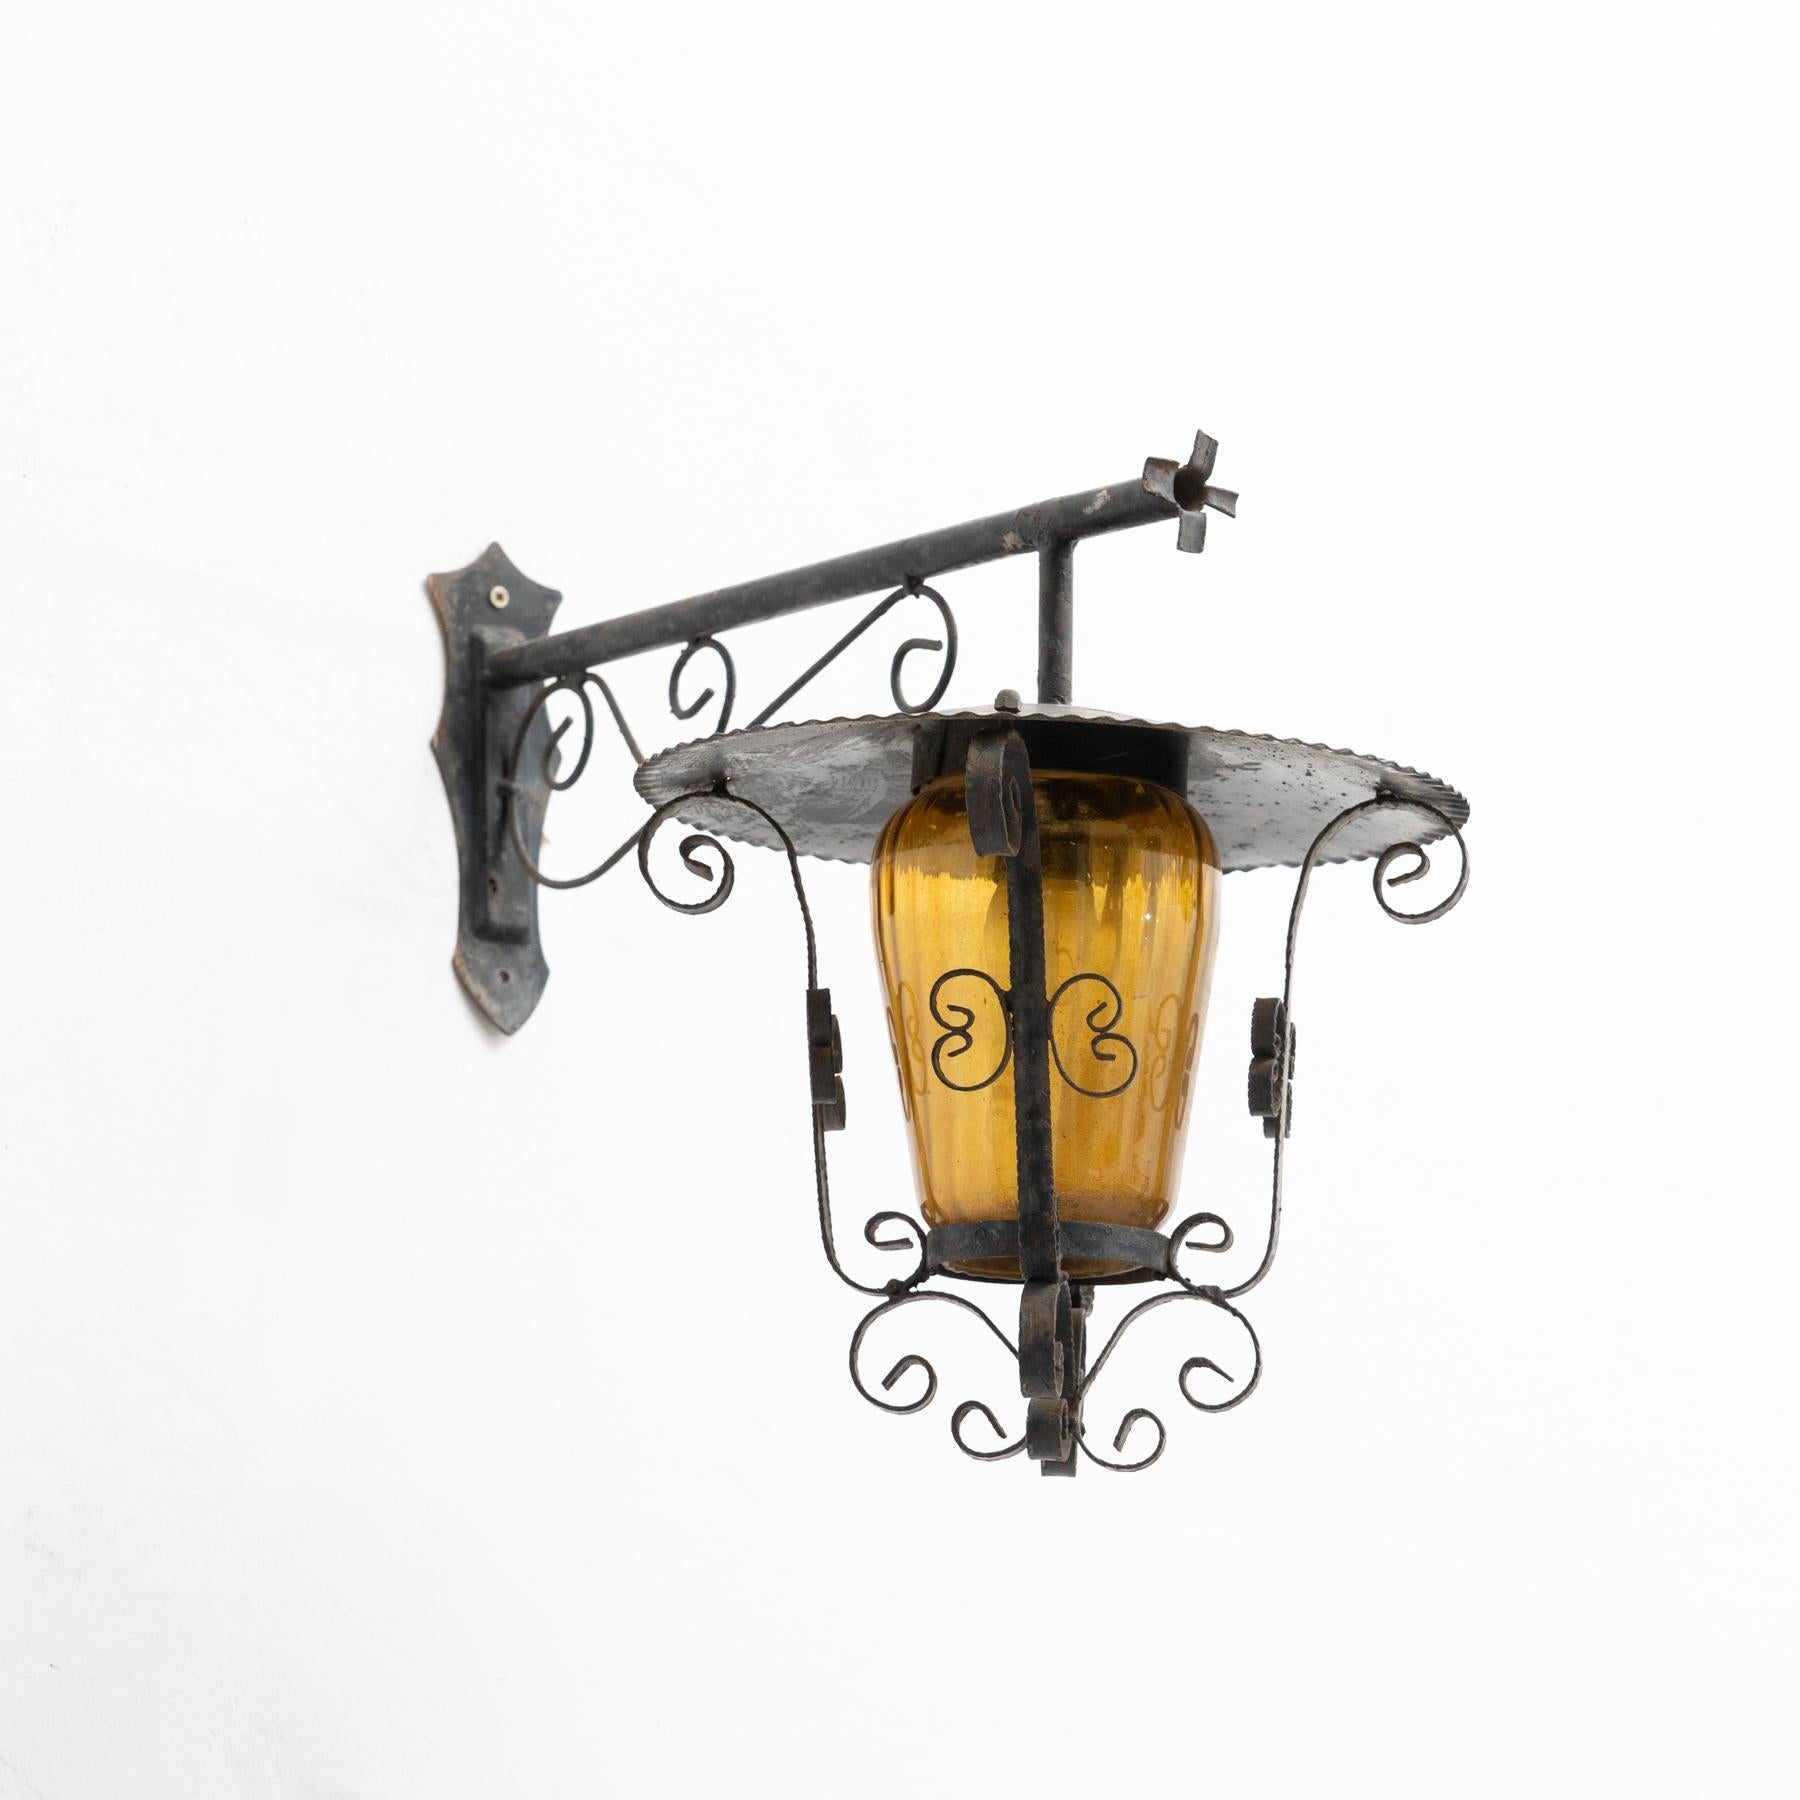 Early 20th century antique outdoors garden wall lamp.

By unknown manufacturer, France.

In original condition, with minor wear consistent with age and use, preserving a beautiful patina.

Not electrified.

Materials:
Metal

 